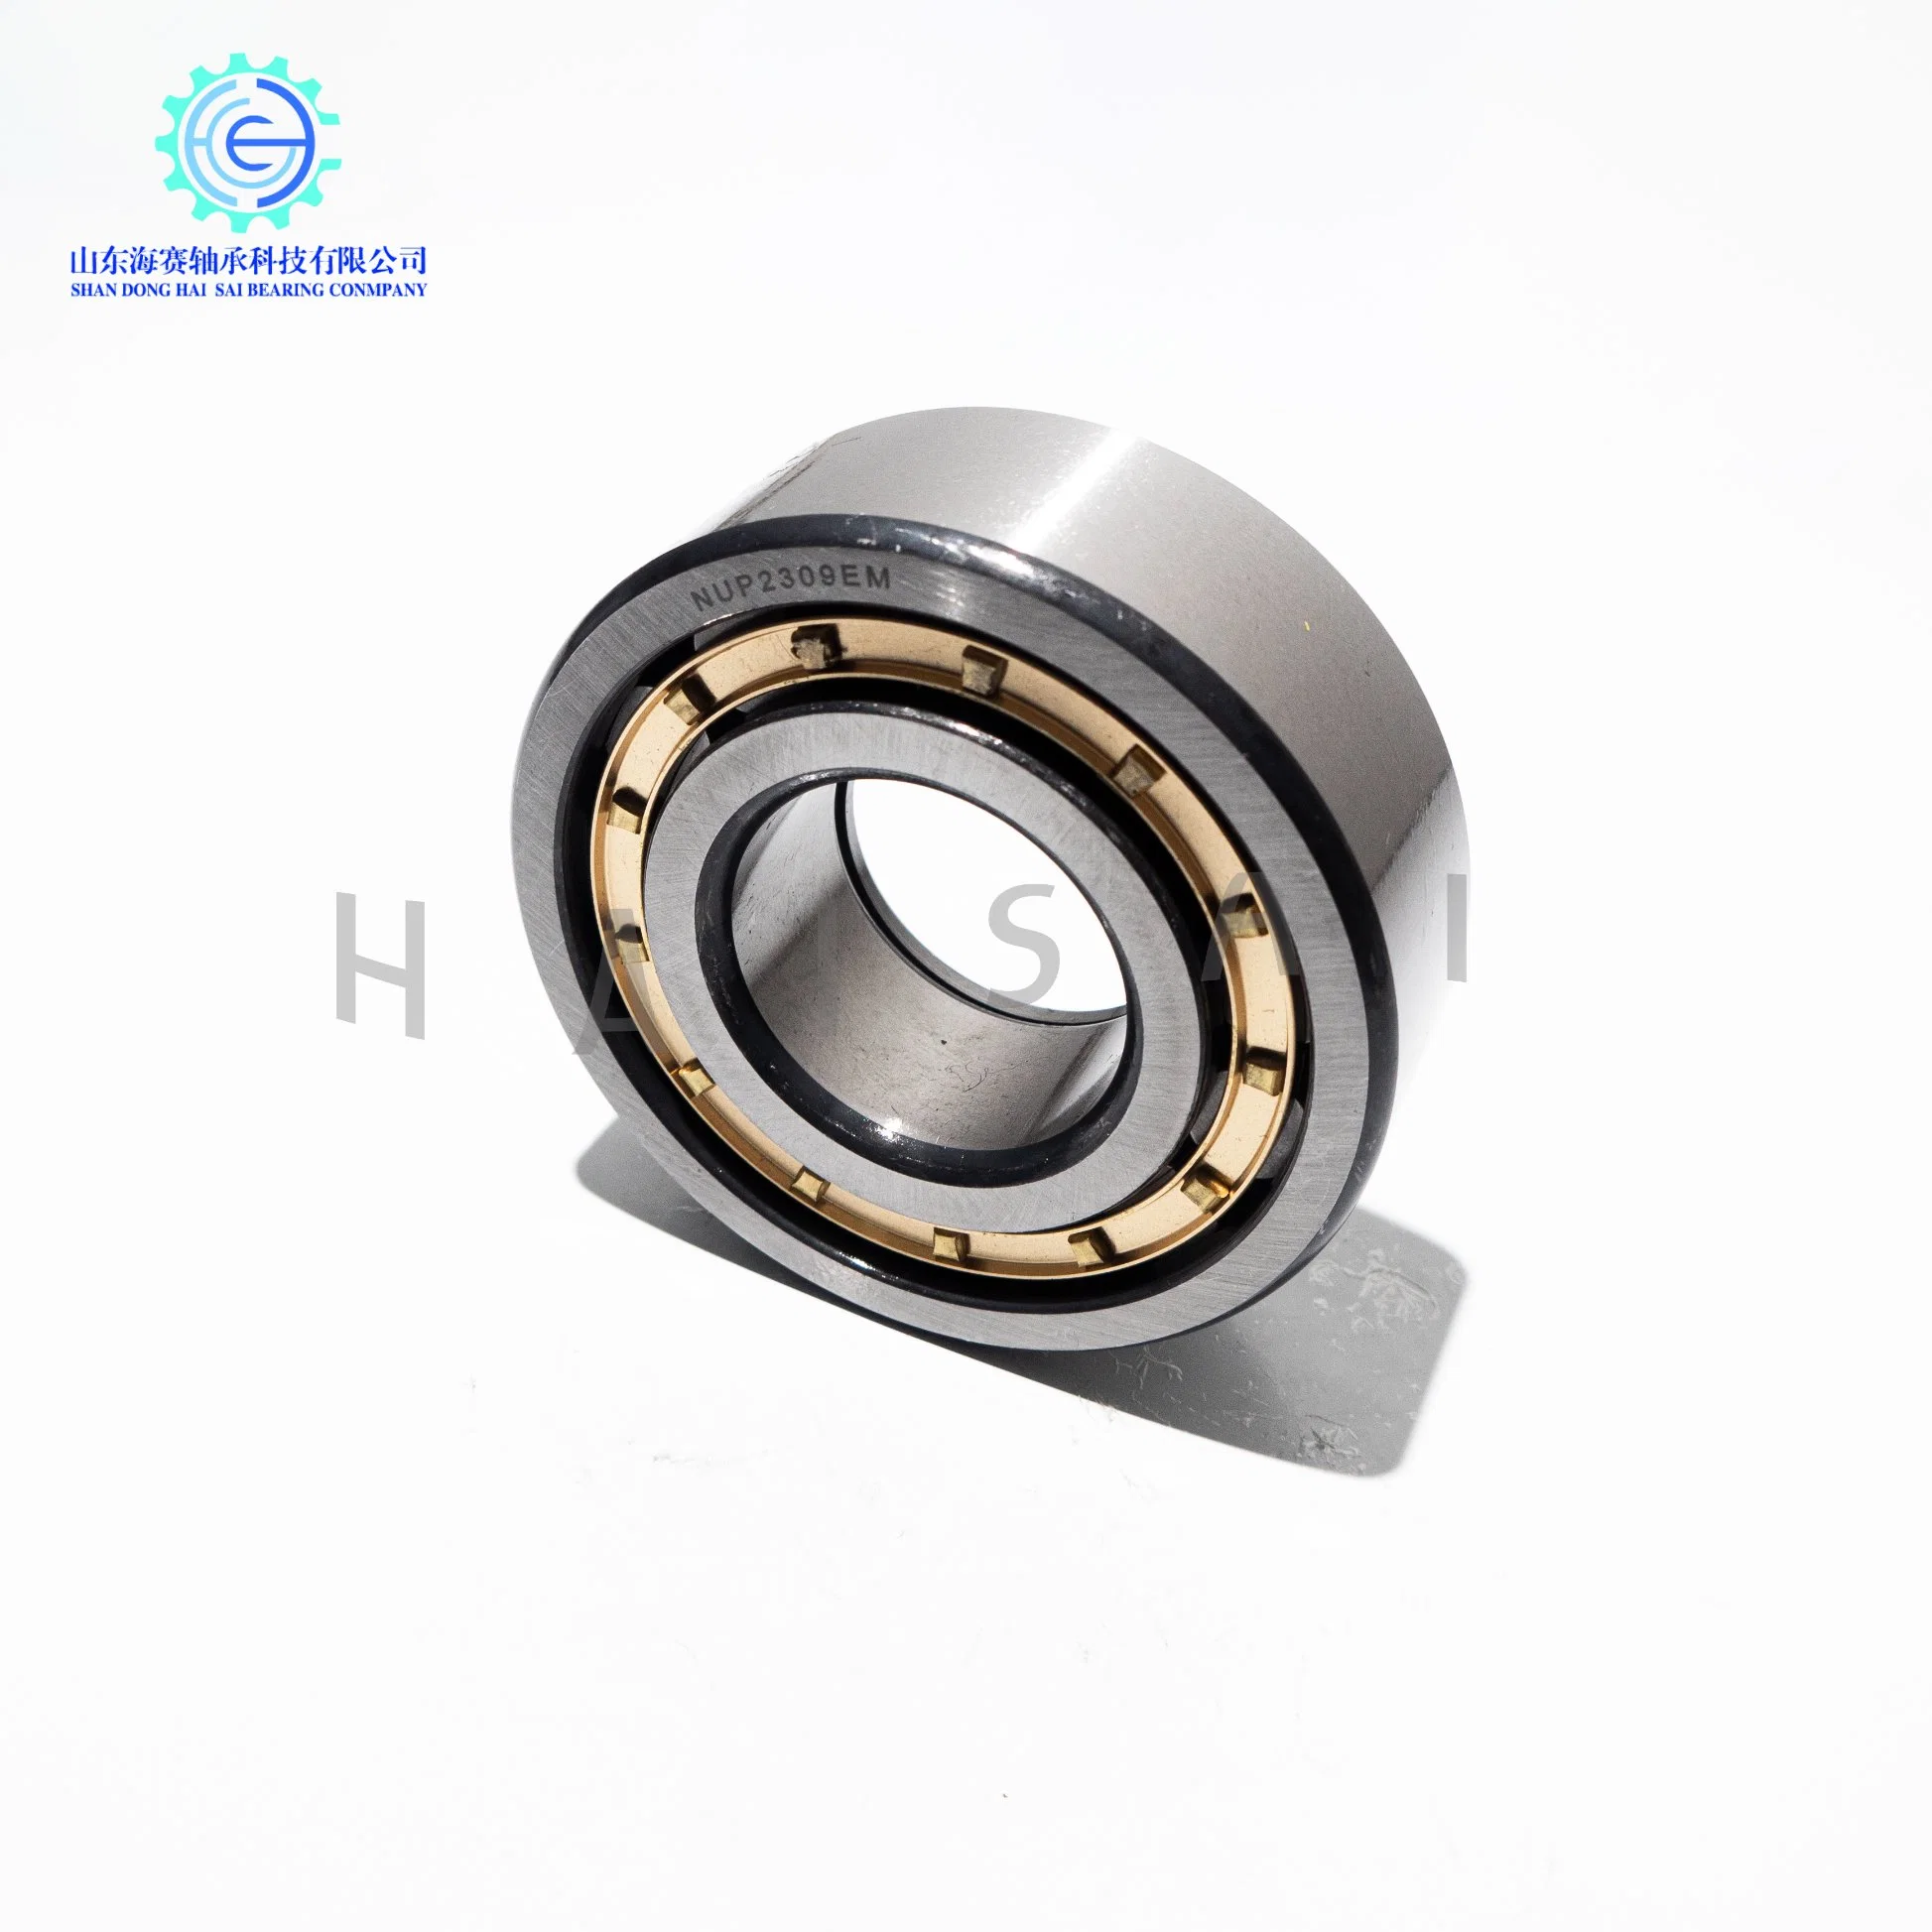 Excavator Bearings Nup211 Cylindrical Roller Bearing